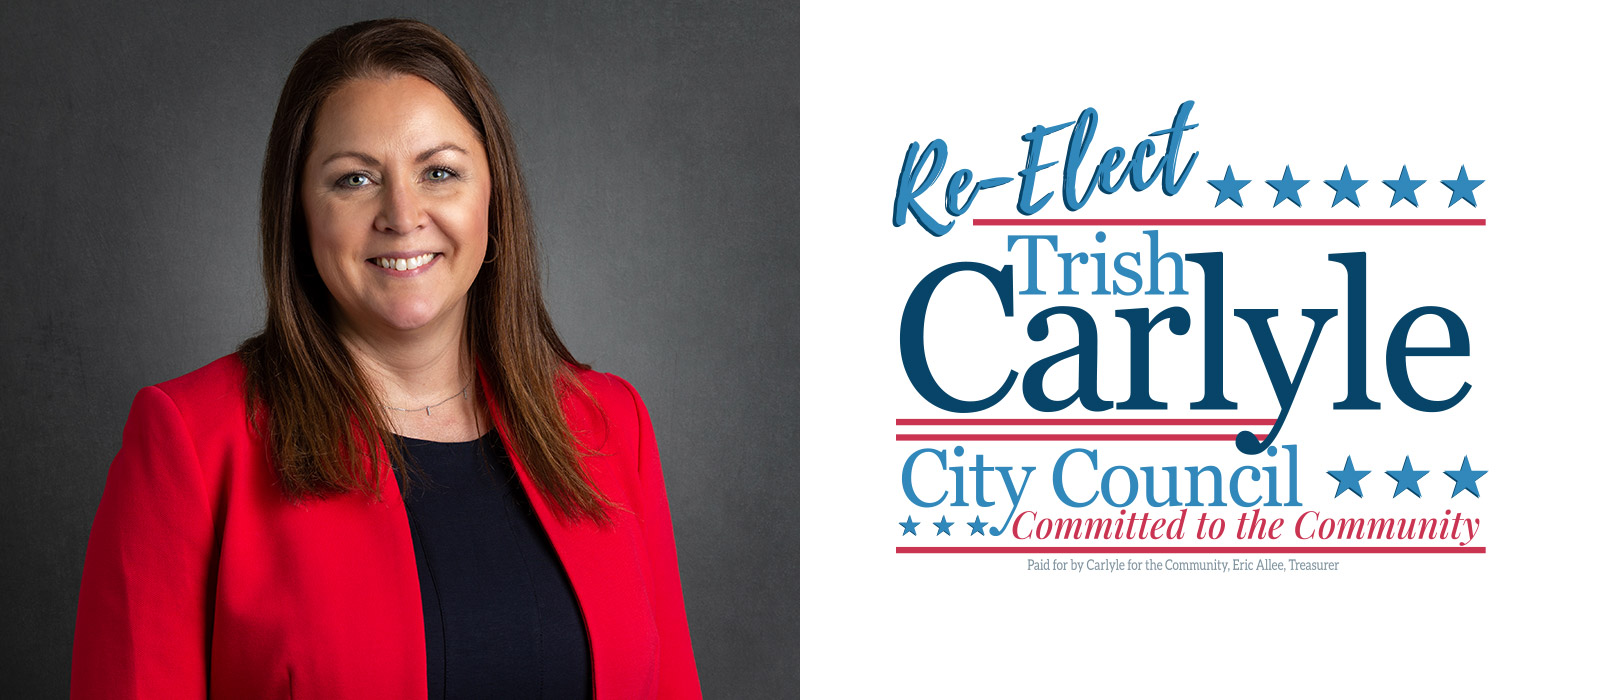 Re-elect Trish Carlyle City Council